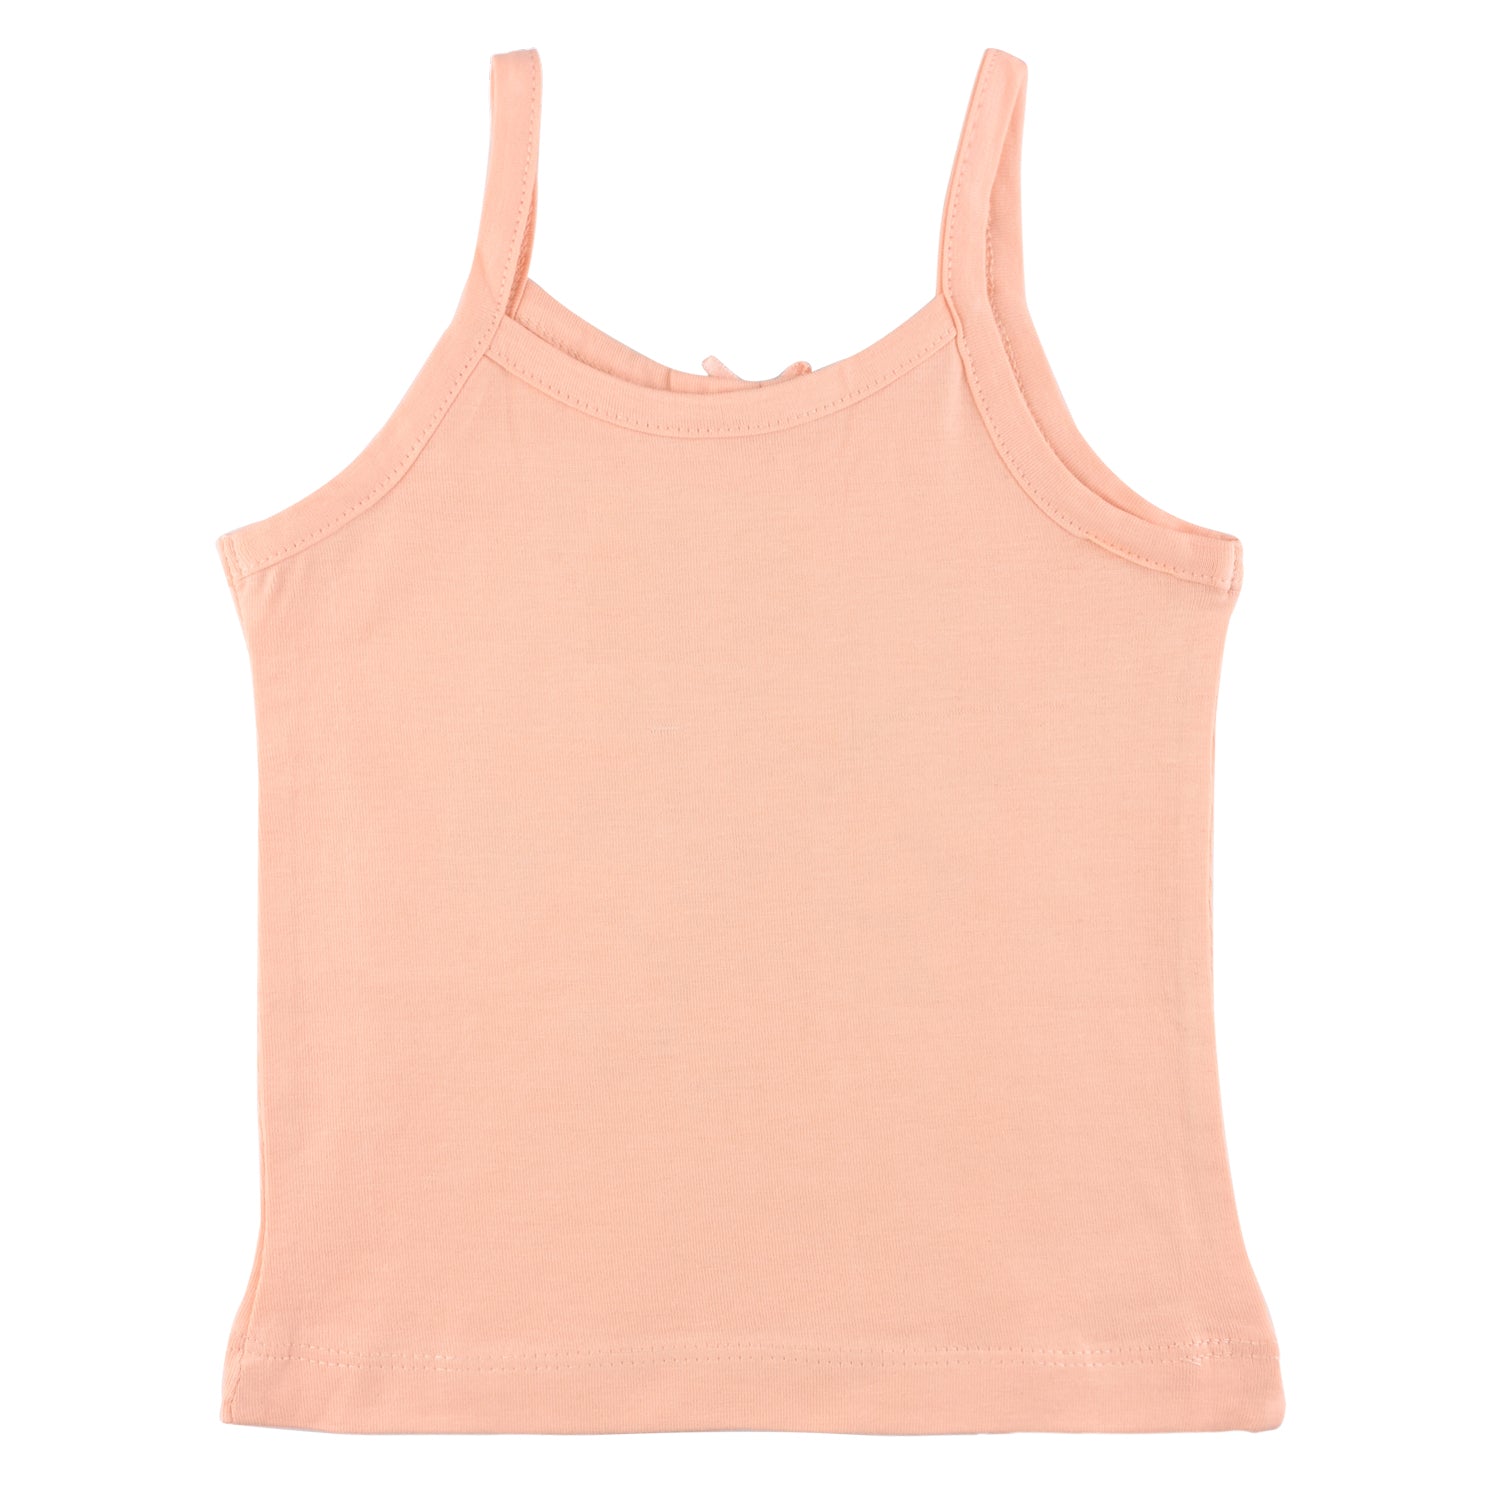 Nuluv Girl's Camisole